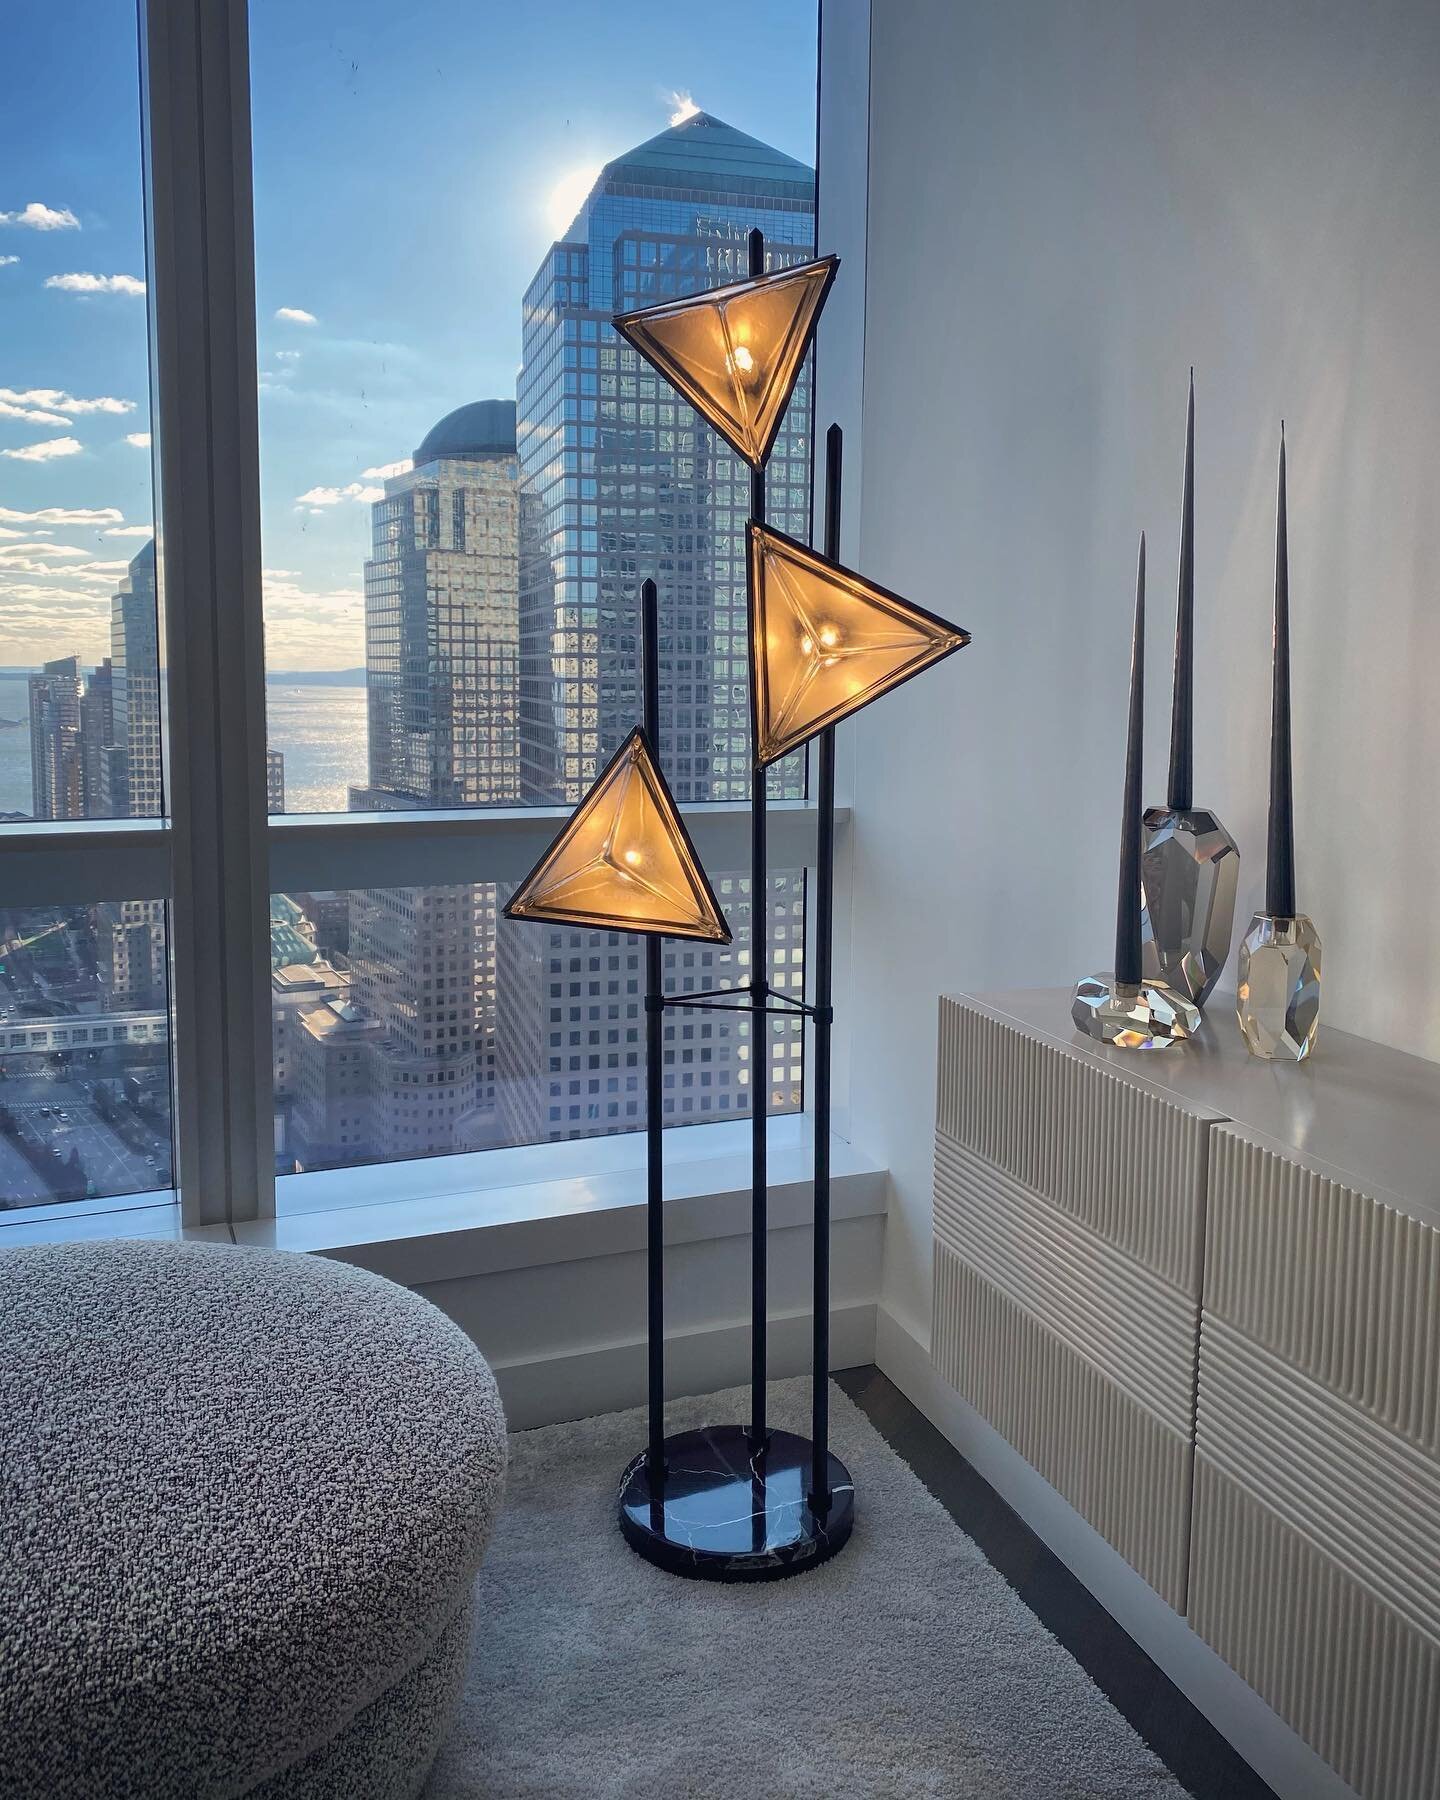 It was well worth the wait! The floor lamp that took over a year to receive! (Thanks to Covid) I knew this was the perfect floor lamp for our design! #LetThereBeLight #floorlamp #globalviews #interlude #modshop1 #111murray #interiors #interiordesign 